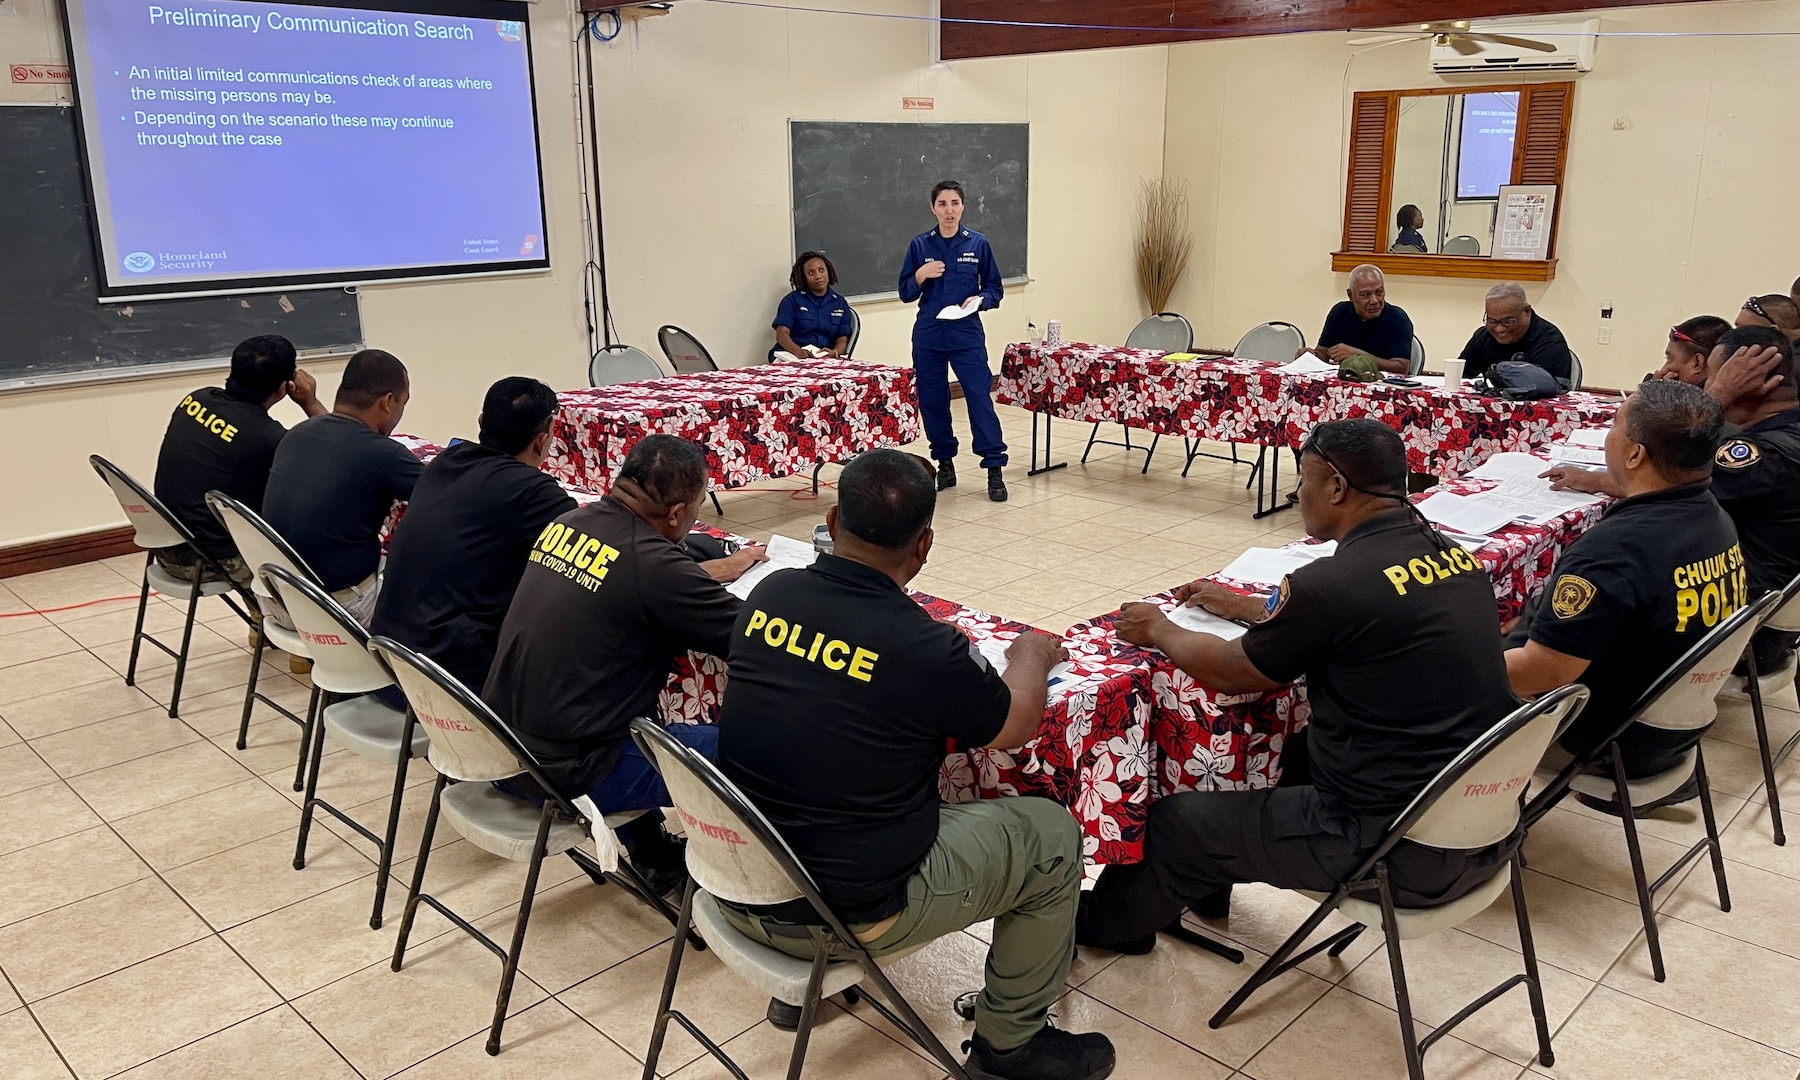 Members of U.S. Coast Guard Forces Micronesia/Sector Guam provide instruction in search and rescue planning and operations during a SAR exercise with partners in the Chuuk State, Federated States of Micronesia, on April 15, 2024. The exercise involved comprehensive seminars and functional drills designed to strengthen SAR response across the region. Key components of the training included SAR system fundamentals, alerting procedures, communications, and a SAR OPS software demonstration, alongside an overdue vessel check sheet exercise. Participants included the Chuuk State Department of Public Safety—Fire and Rescue and Chuuk Disaster Coordination Office. (U.S. Coast Guard photo by Lt. Henry Dunphy)